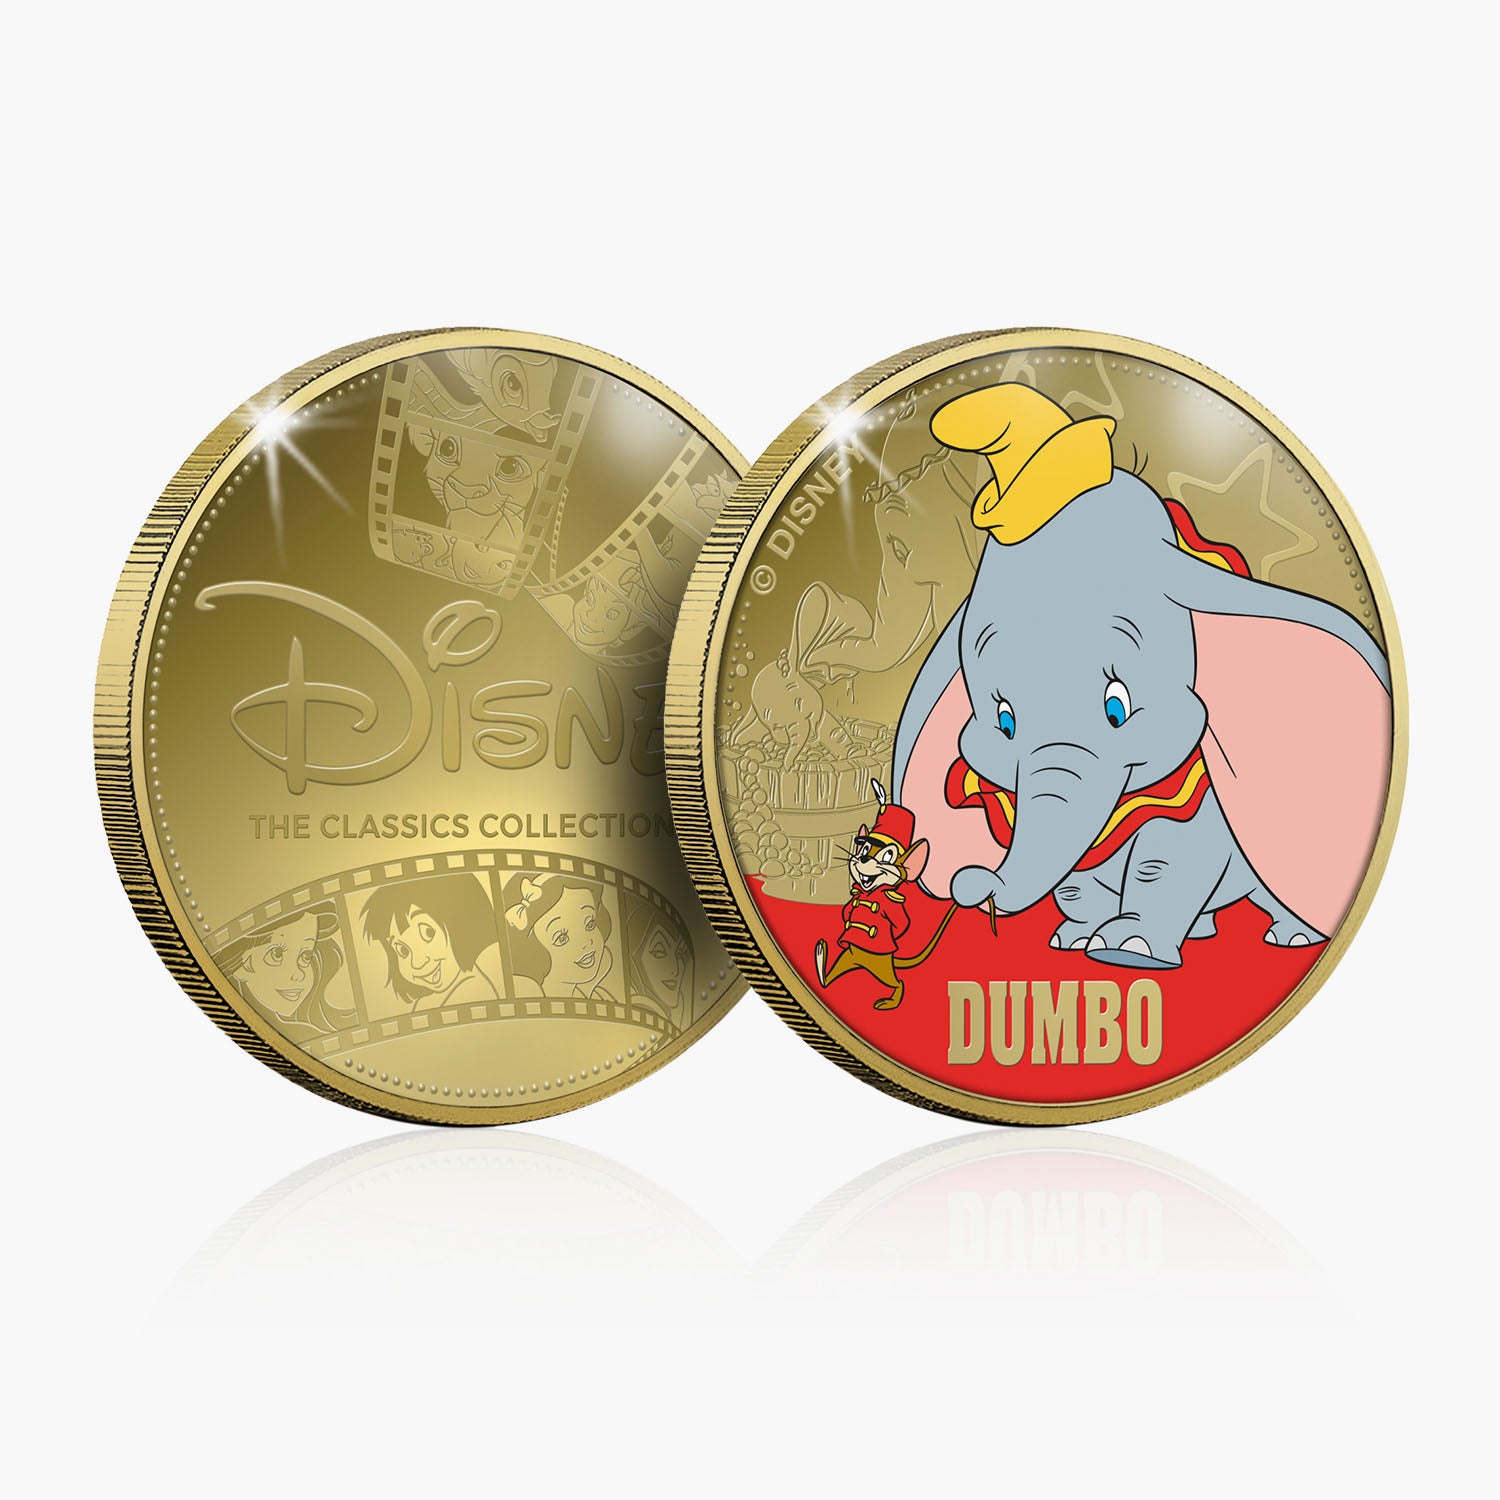 Dumbo Gold-Plated Commemorative